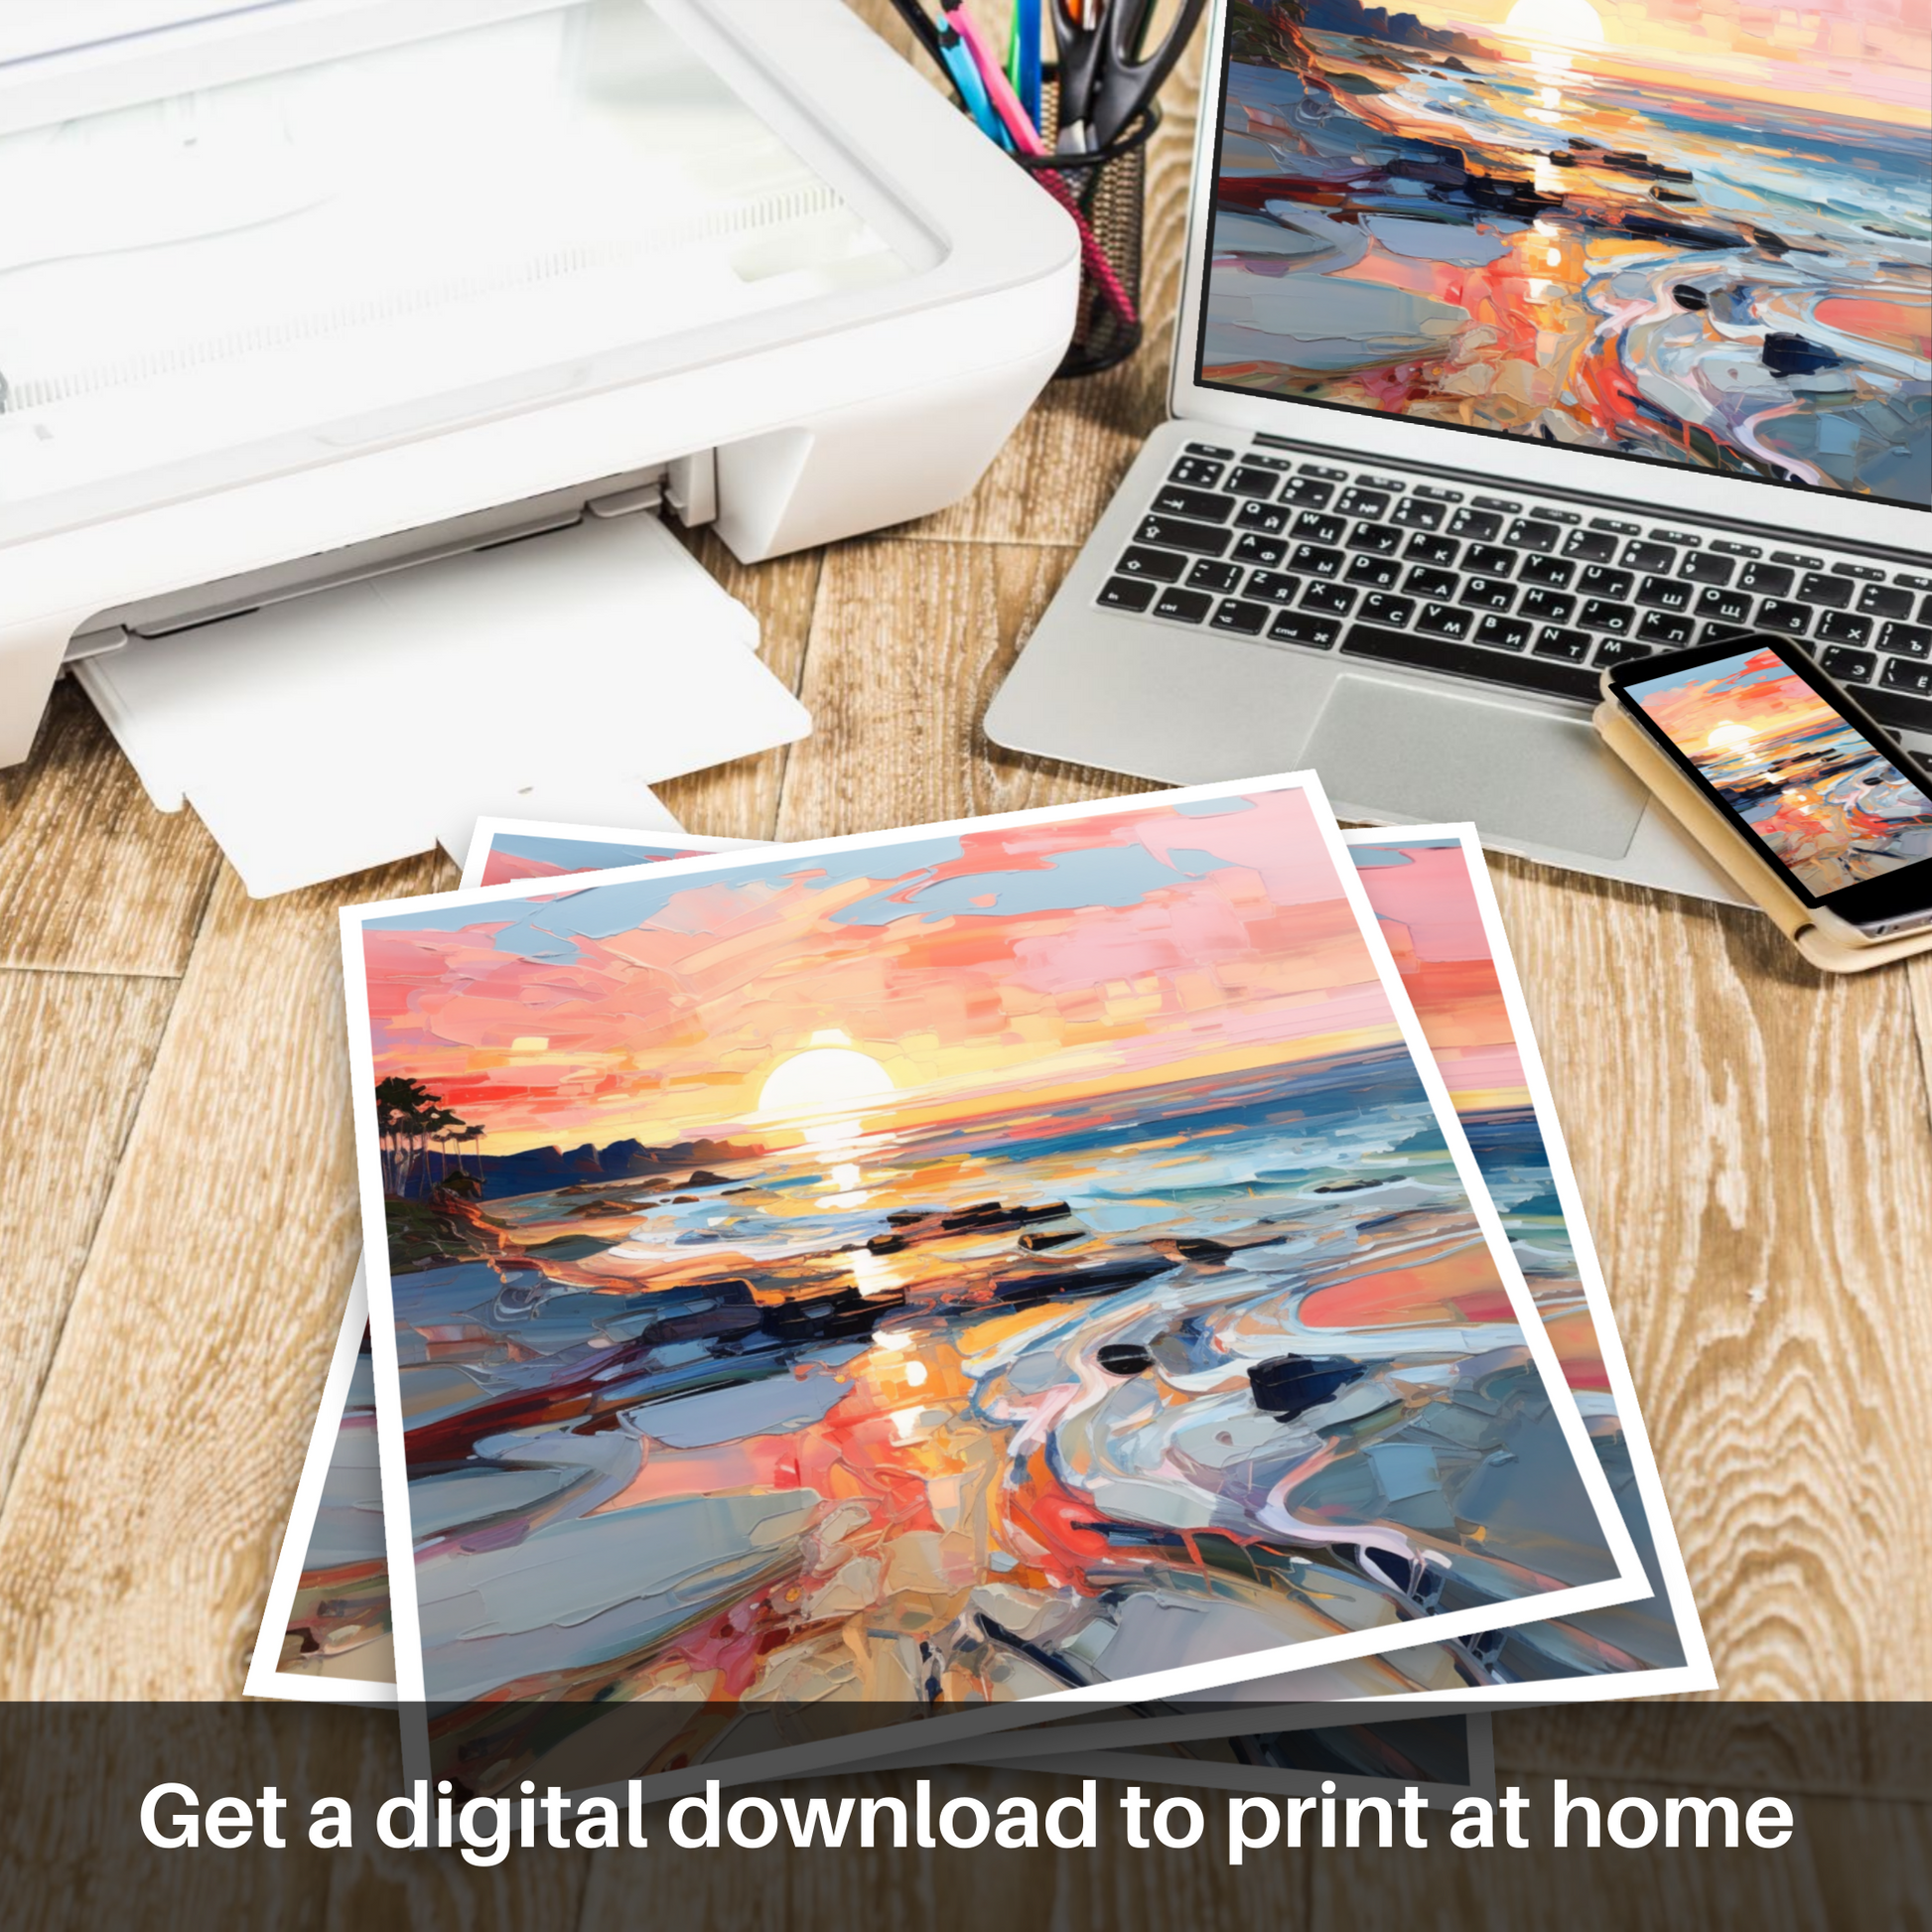 Downloadable and printable picture of Coral Beach at sunset